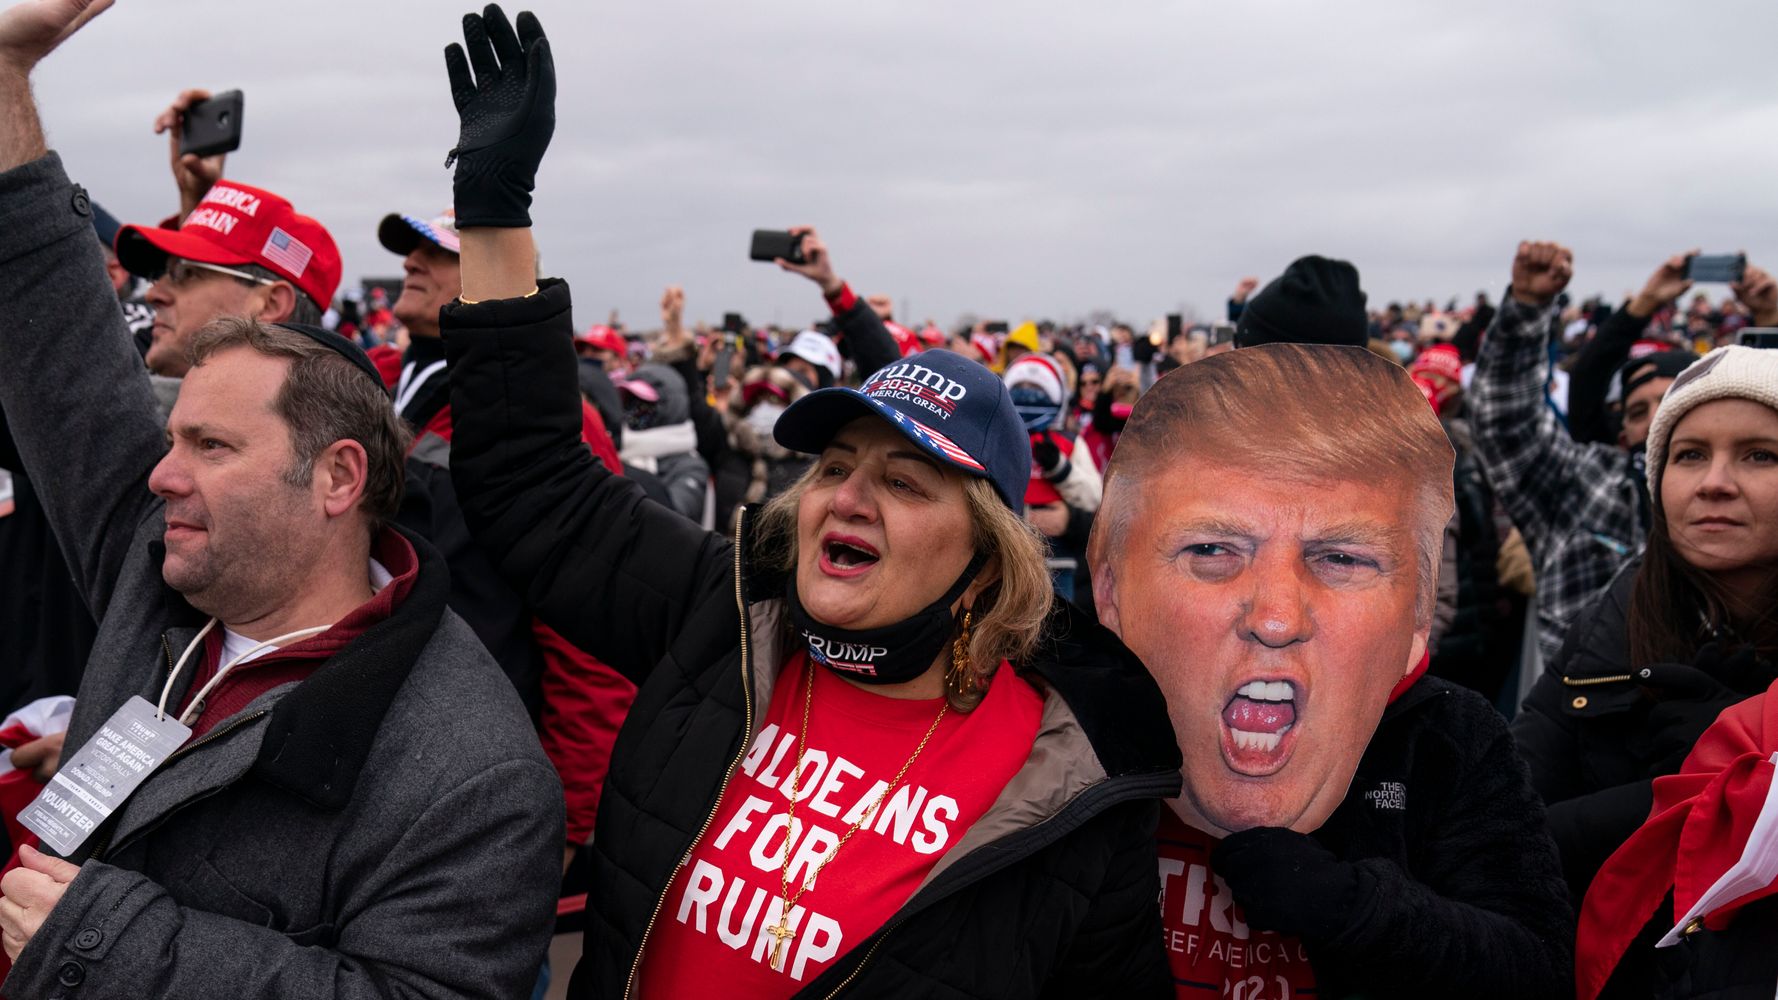 Trump's Rallies Didn't Pay Off For Him At The Polls, According To Data